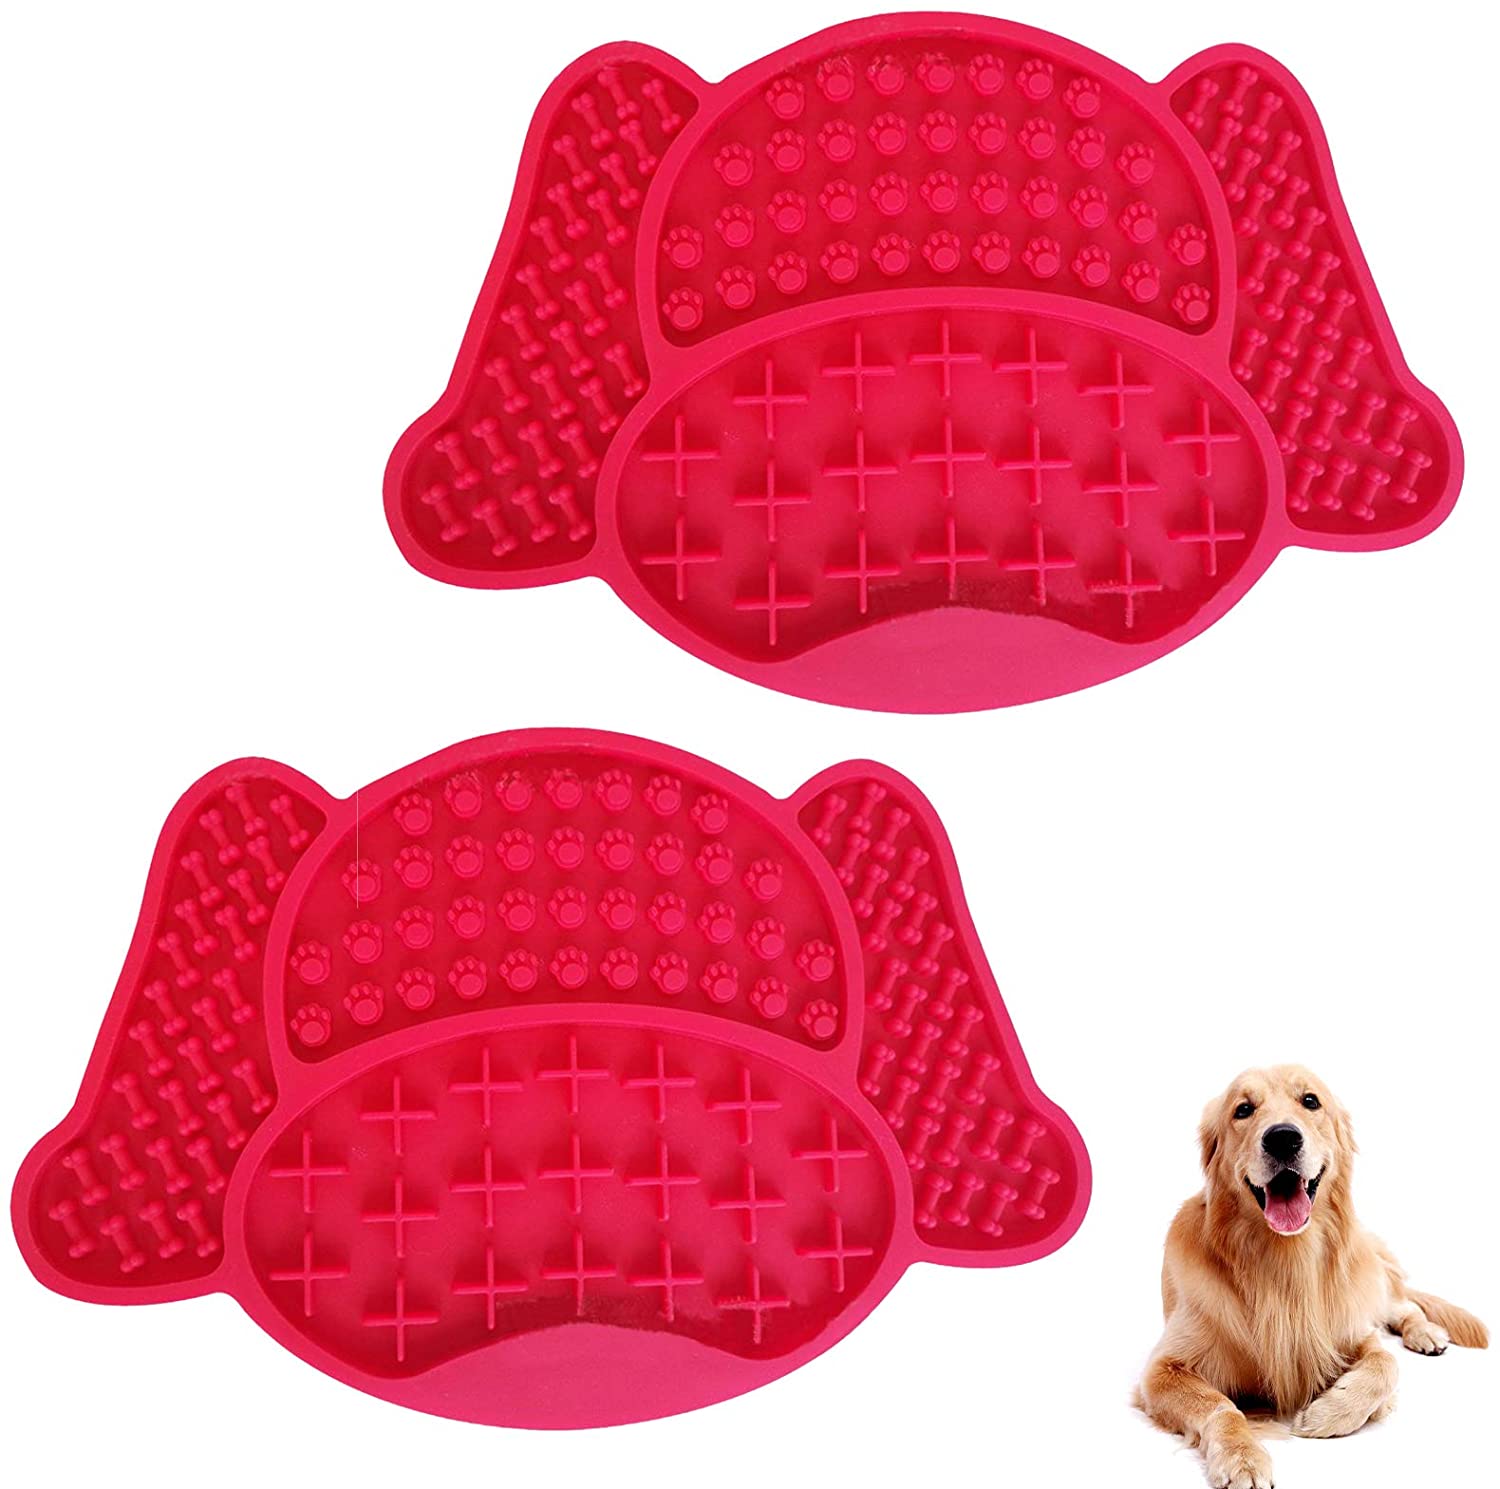 https://consumersiliconeproducts.com/wp-content/uploads/2022/05/Customized-Silicone-Dog-Lick-Mats.jpg